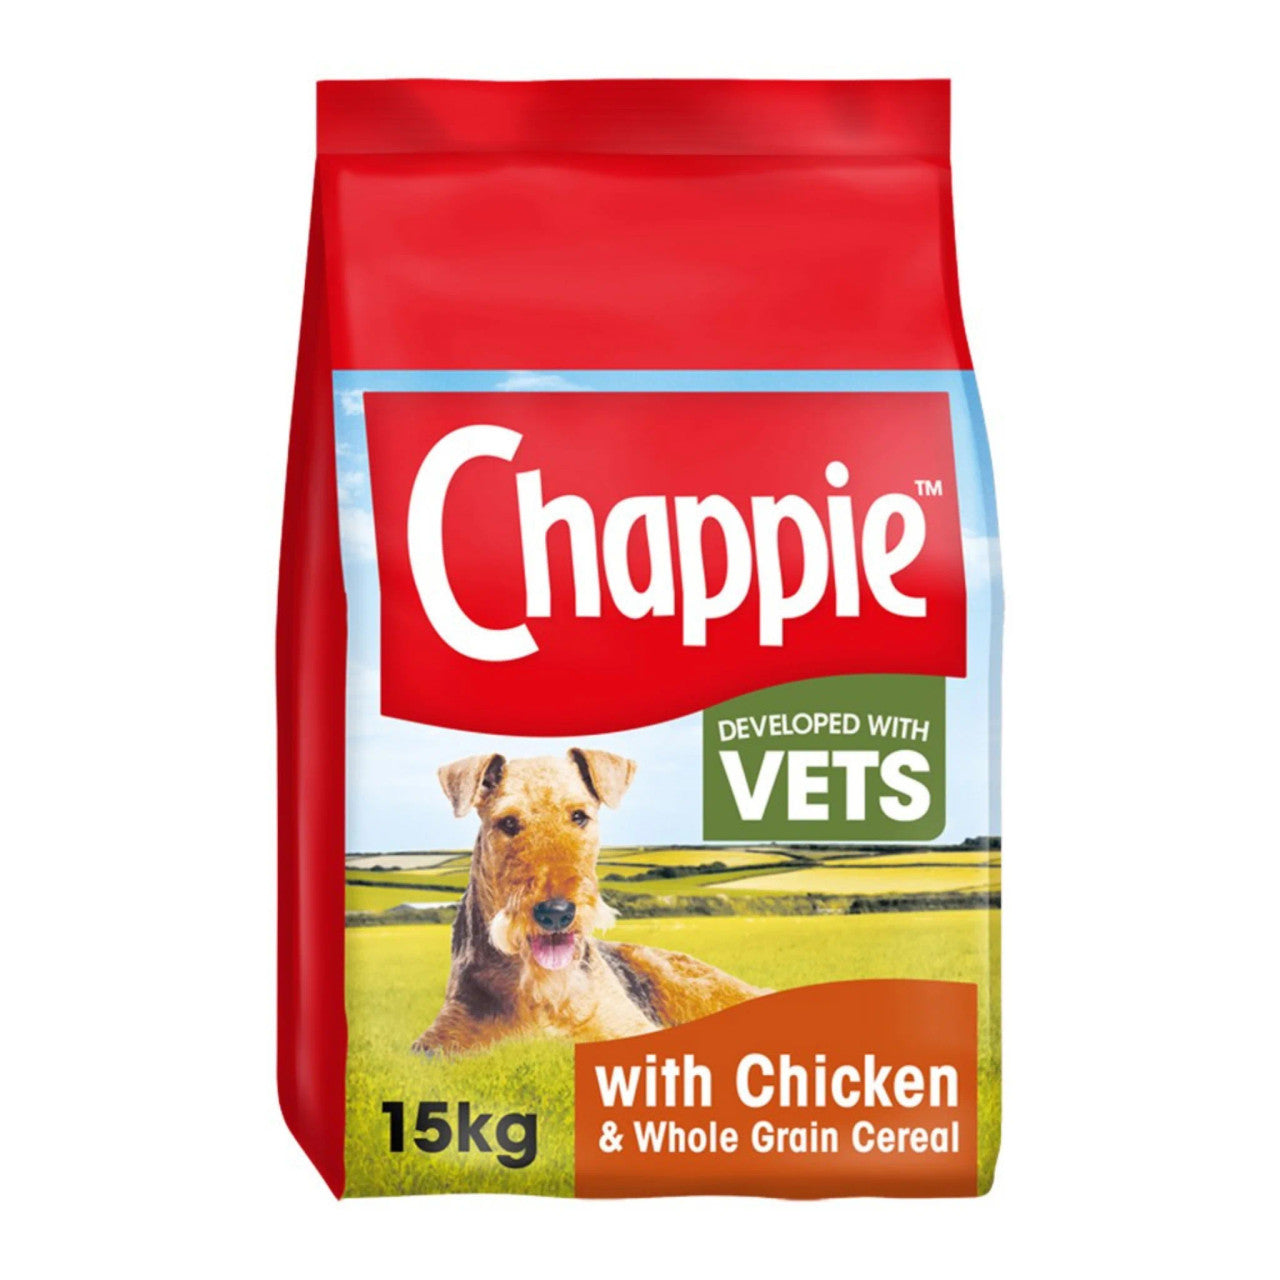 Chappie Adult Dog Chicken & Whole Grain Cereal 15kg - Dry Dog Food